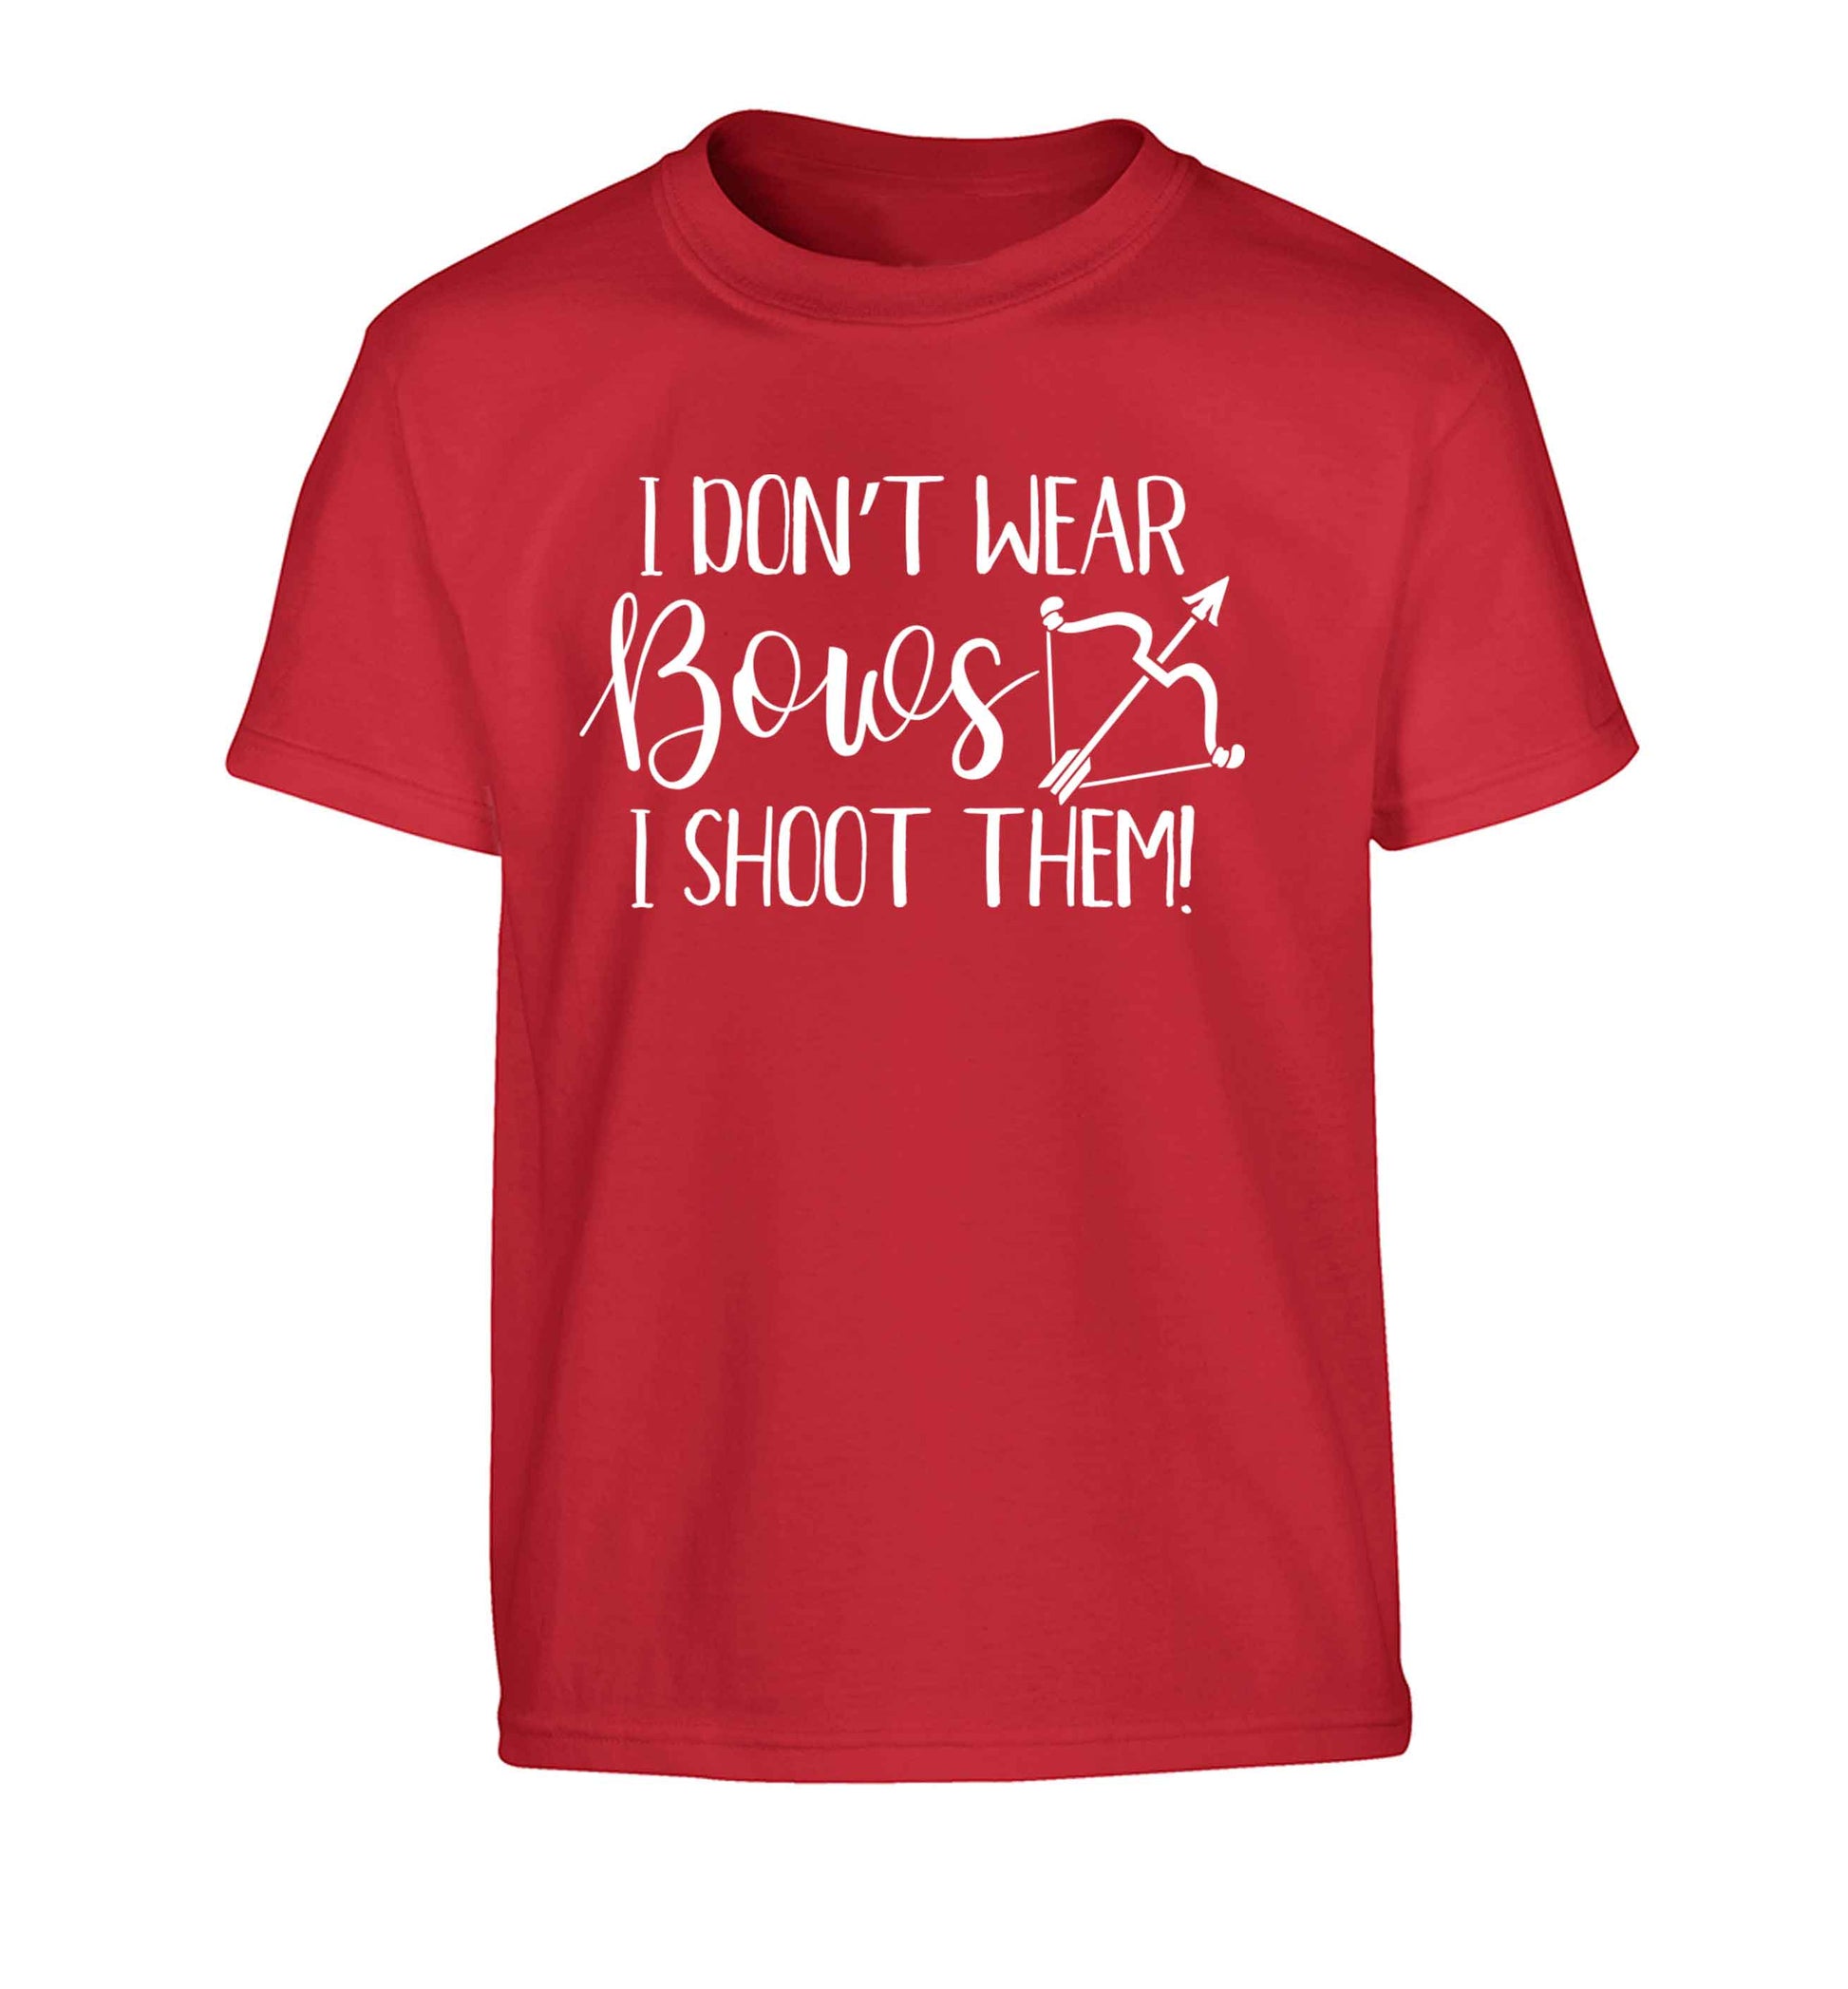 I don't wear bows I shoot them Children's red Tshirt 12-13 Years